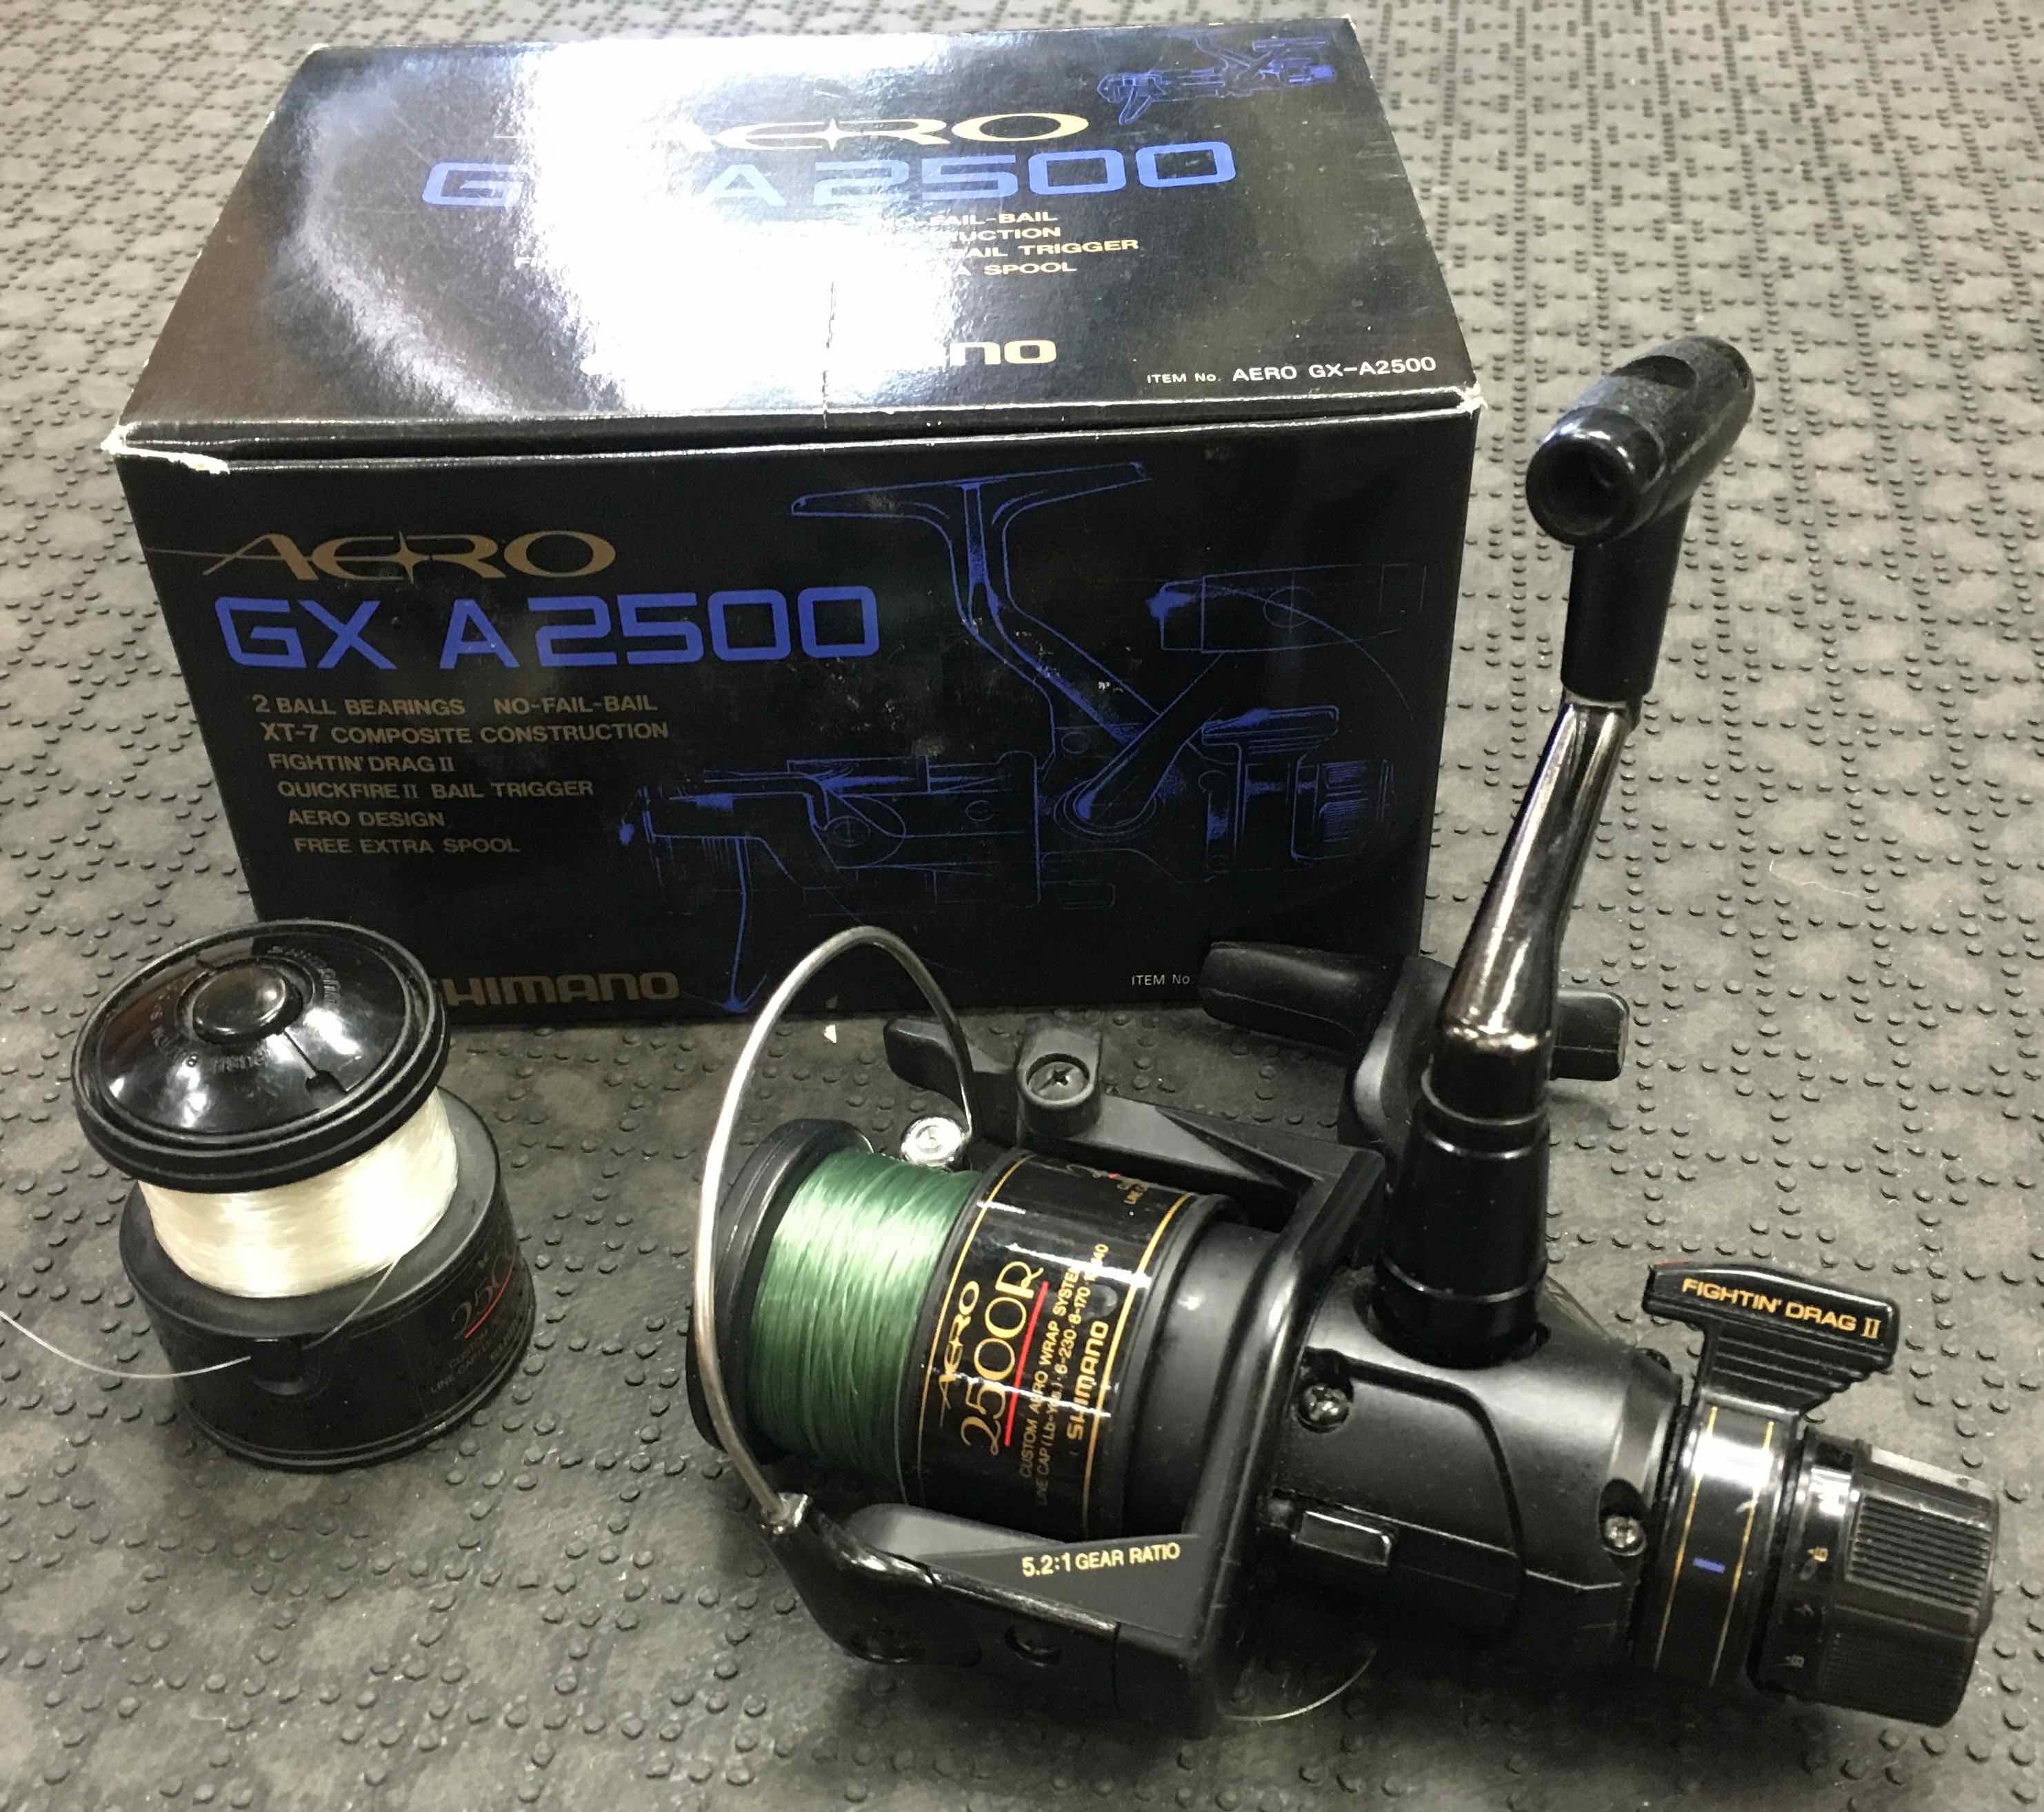 https://thefirstcast.ca/wp-content/uploads/2016/08/Shimano-Aero-GX-A2500R-Spinning-Reel-with-Spare-Spool-AA.jpg